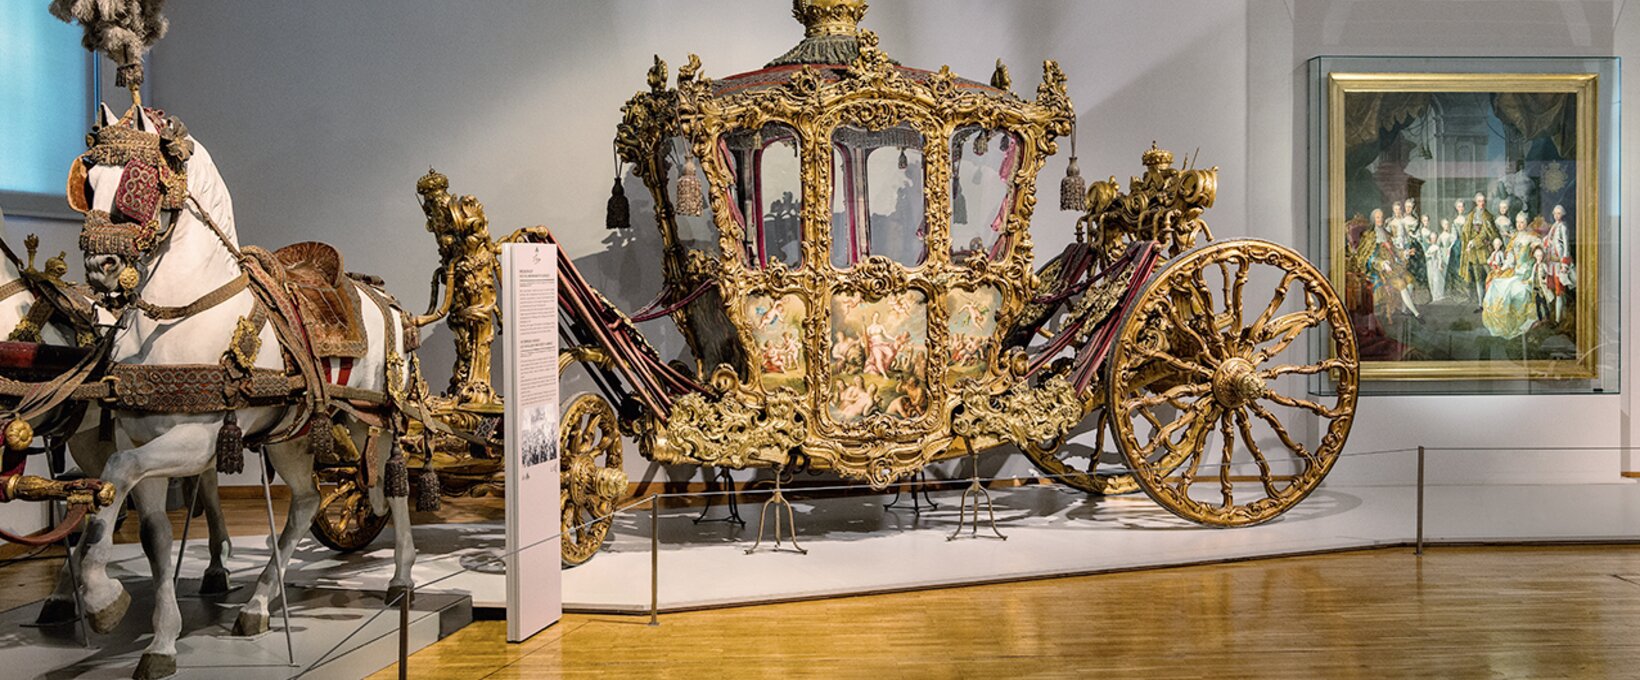  Imperial coach, Imperial Carriage Museum | Vienna | © KHM-Museumsverband